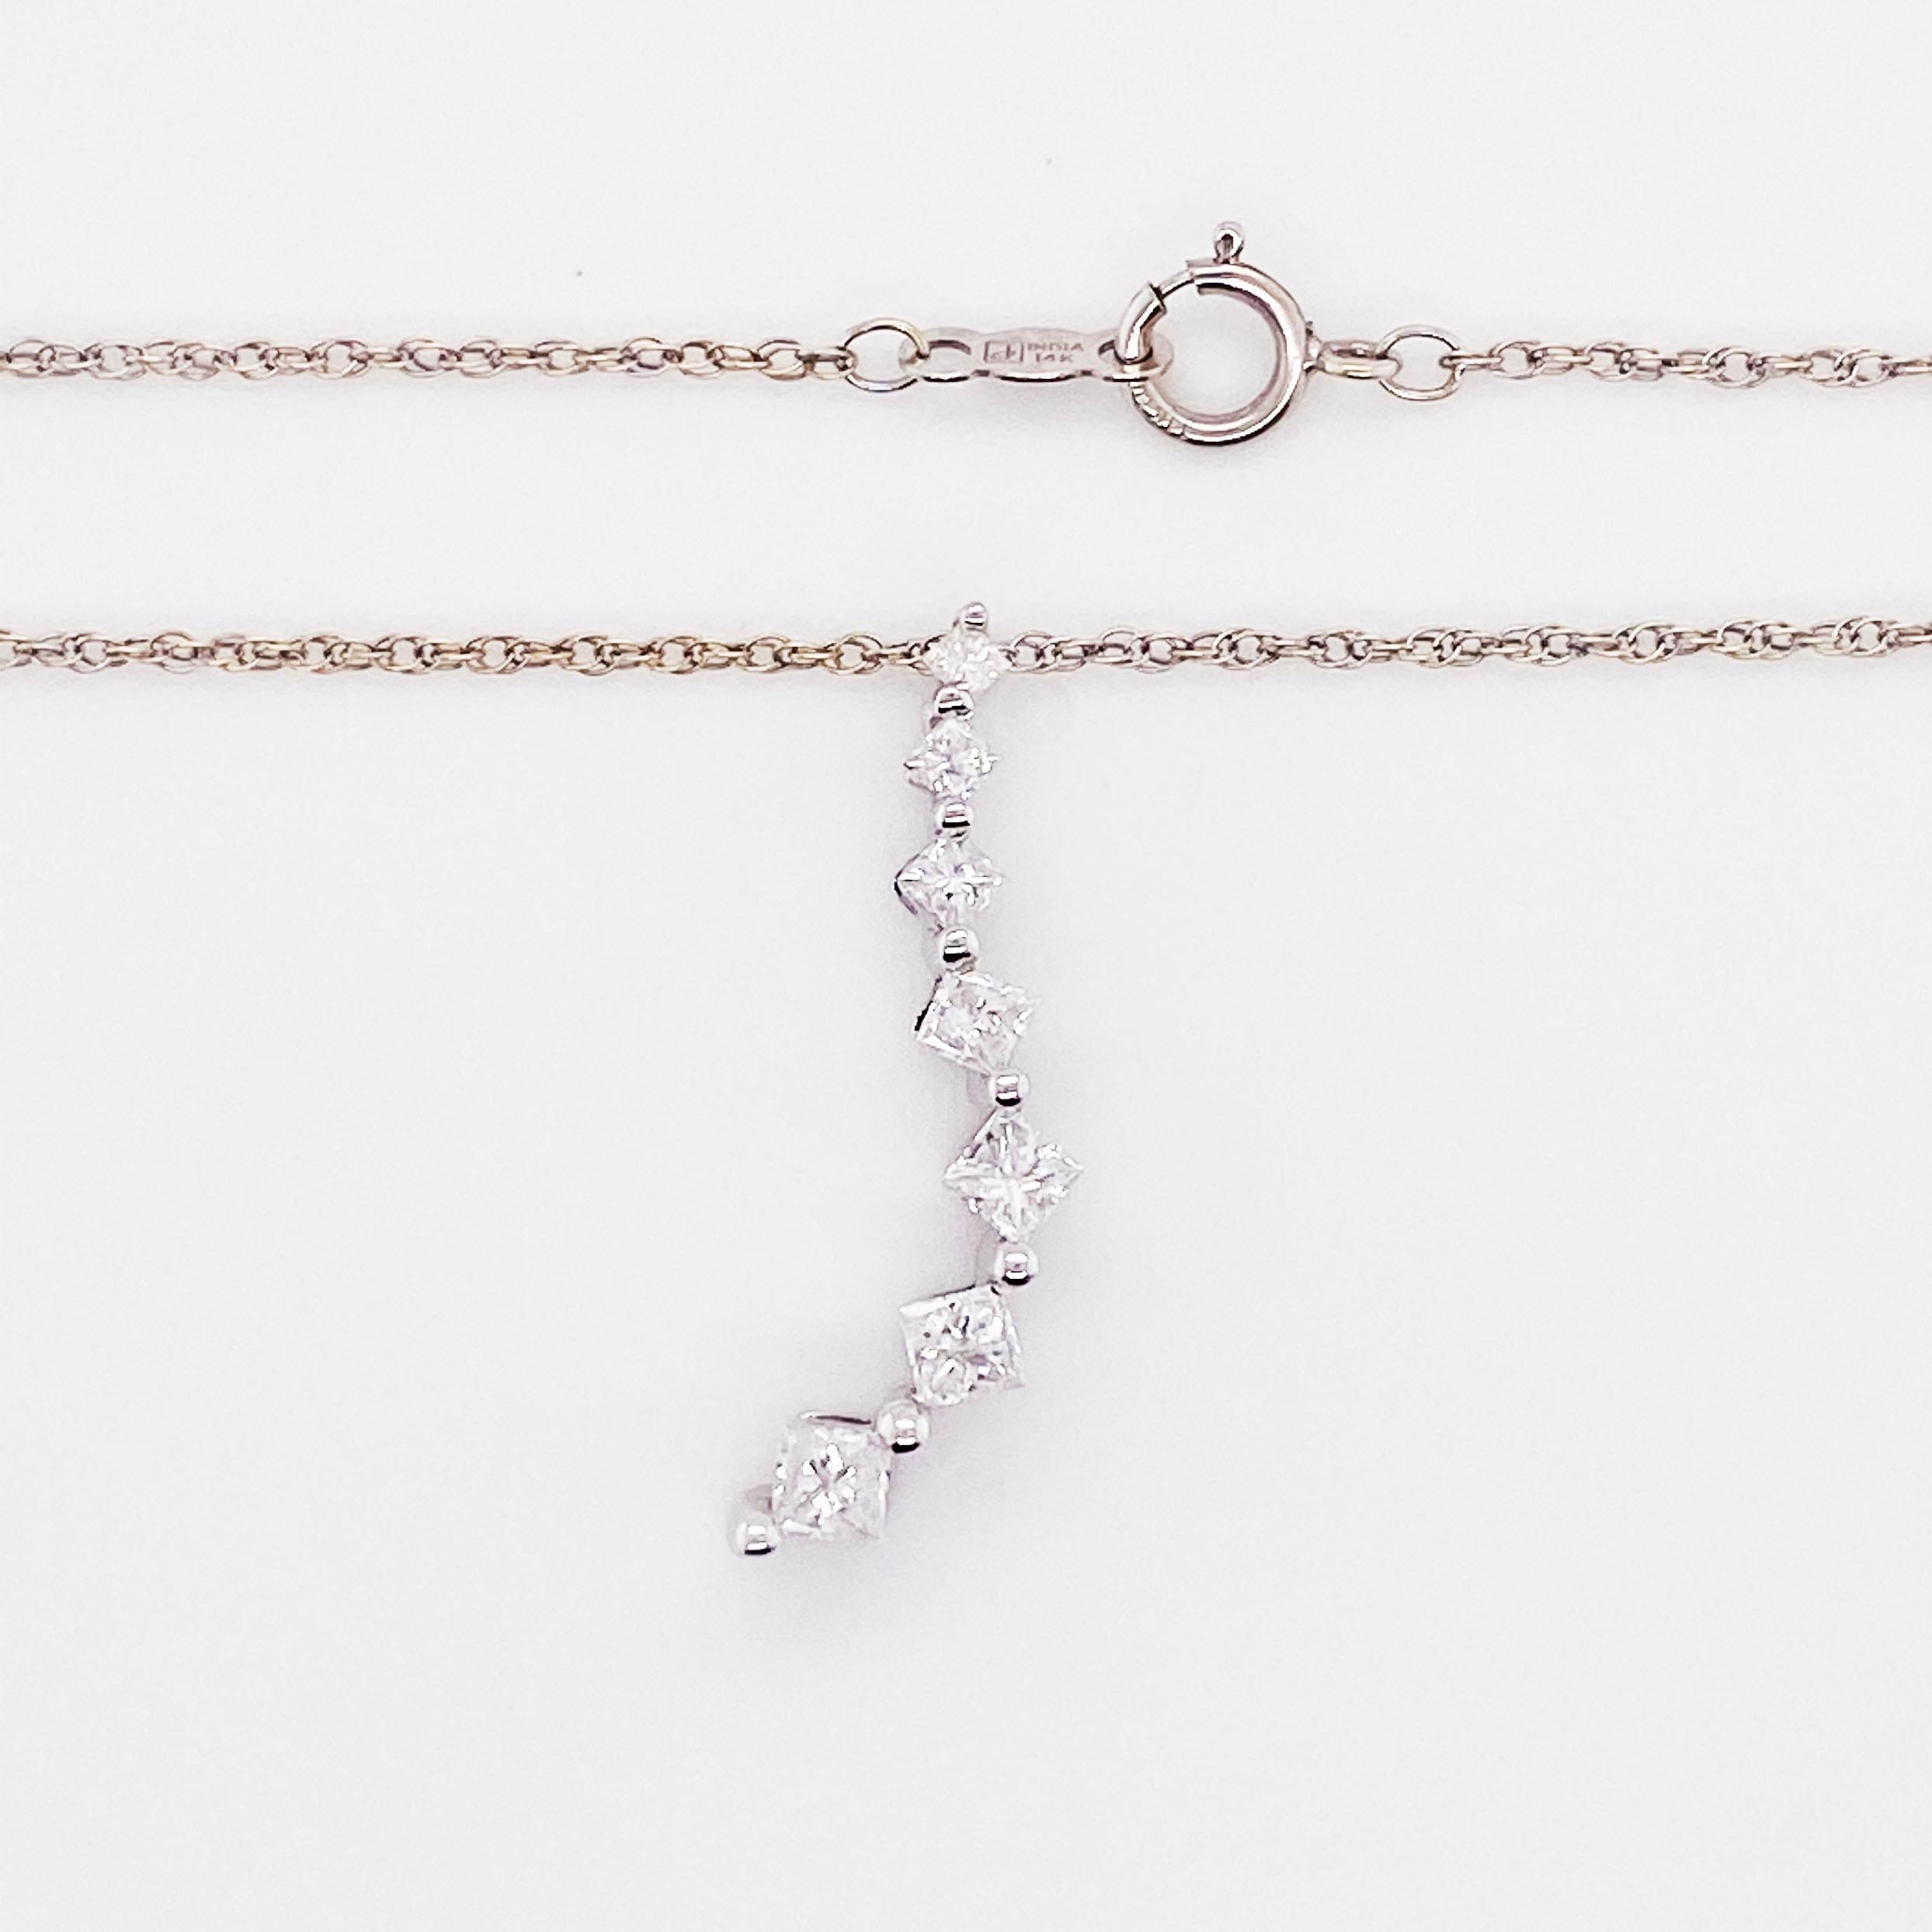 This diamond necklace looks like a kite flying in the air!  It has seven (7) princess cut diamonds that are all different sizes.  It starts with a smaller princess cut diamonds at the top and tapers to larger diamonds as you get down to the longest